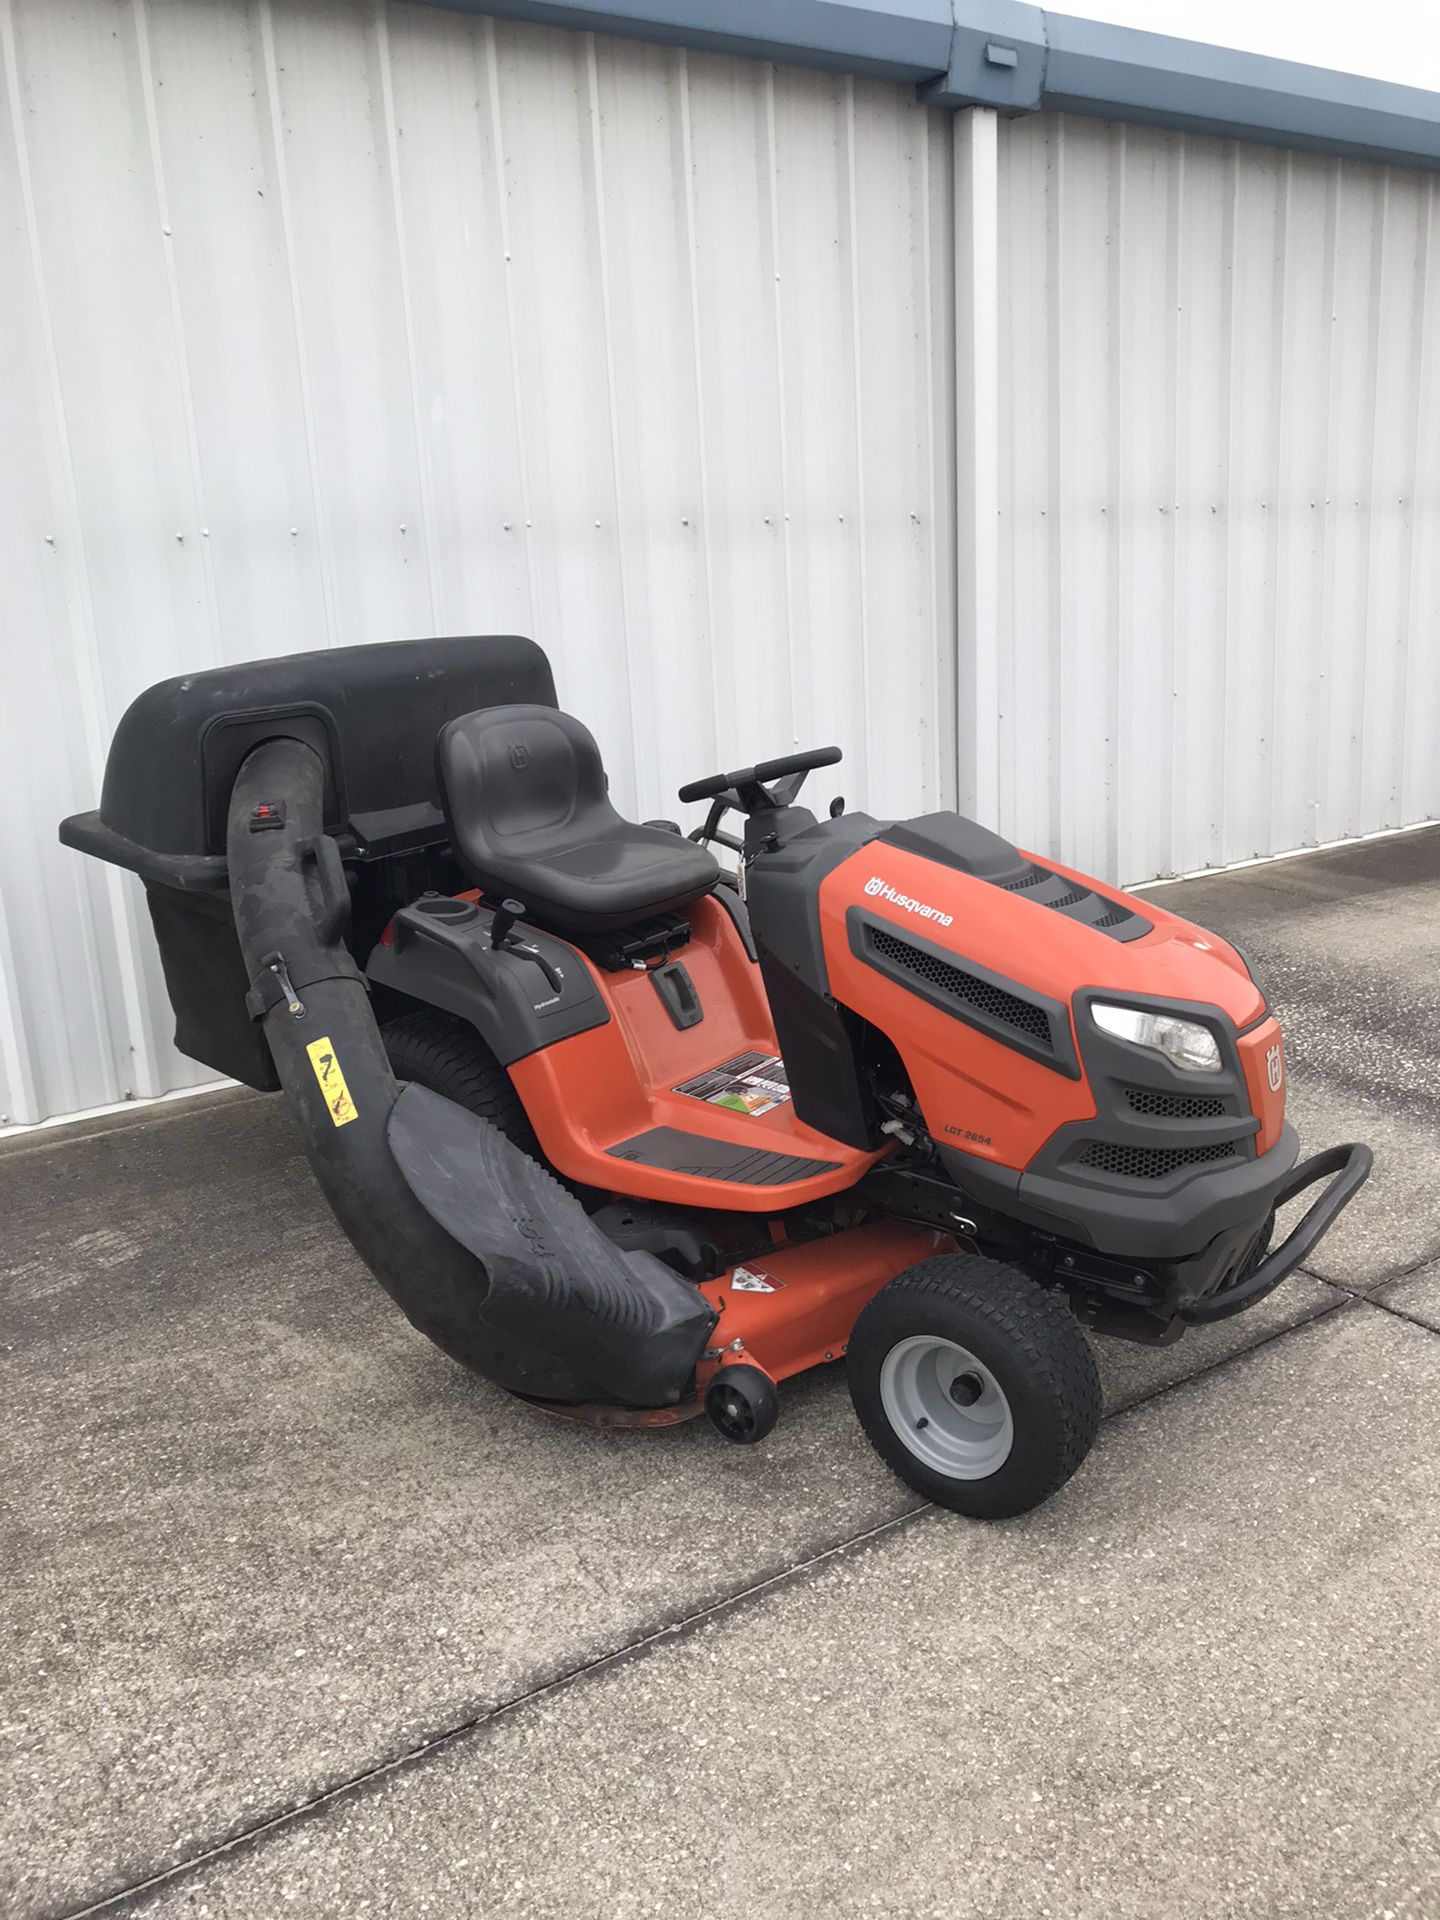 HUSQVARNA LGT2654 TRACTOR 54 INCH RIDING LAWN MOWER WITH BAGGER